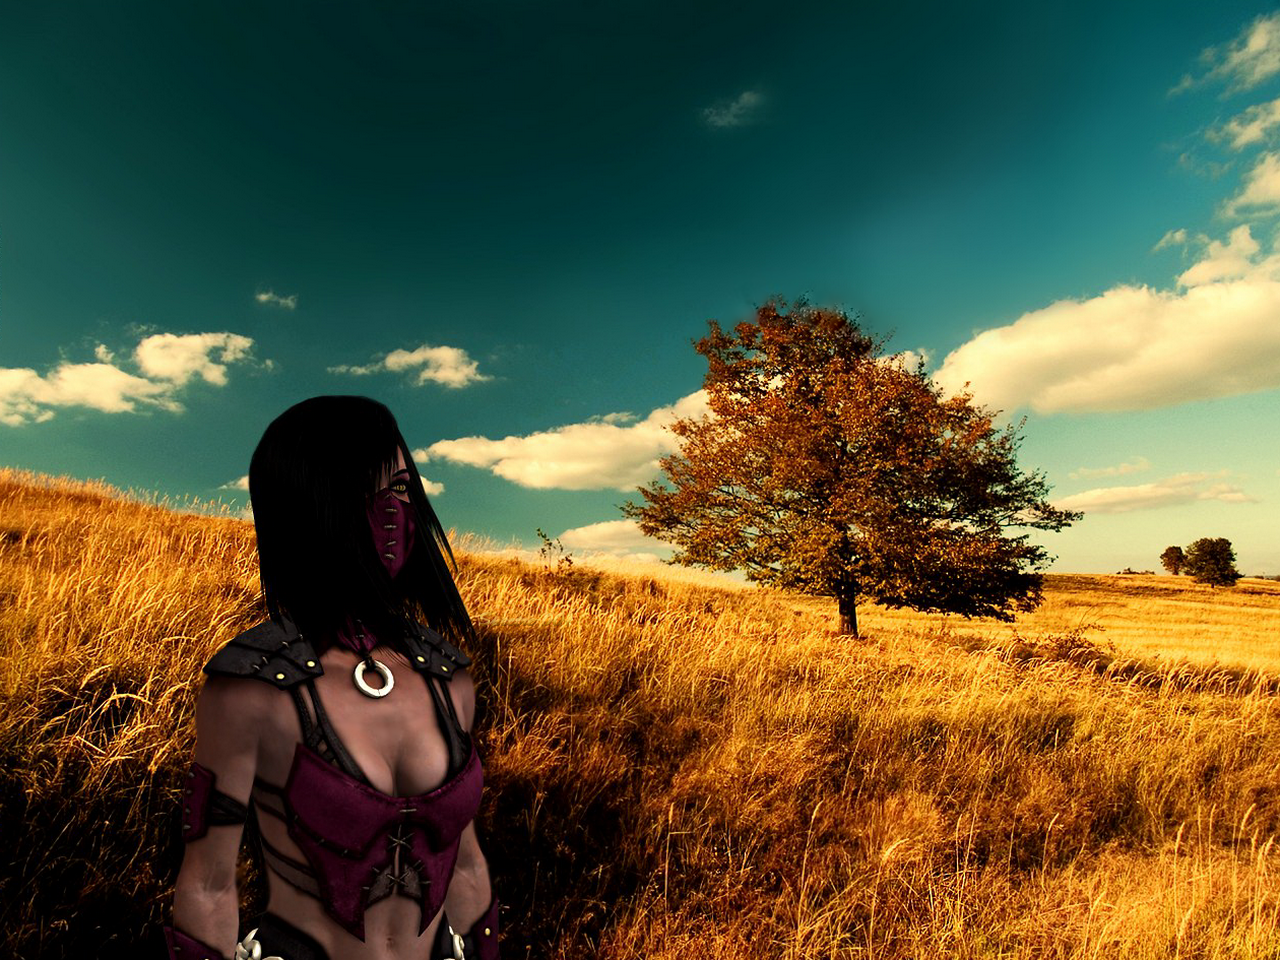 Mileena's lonely day